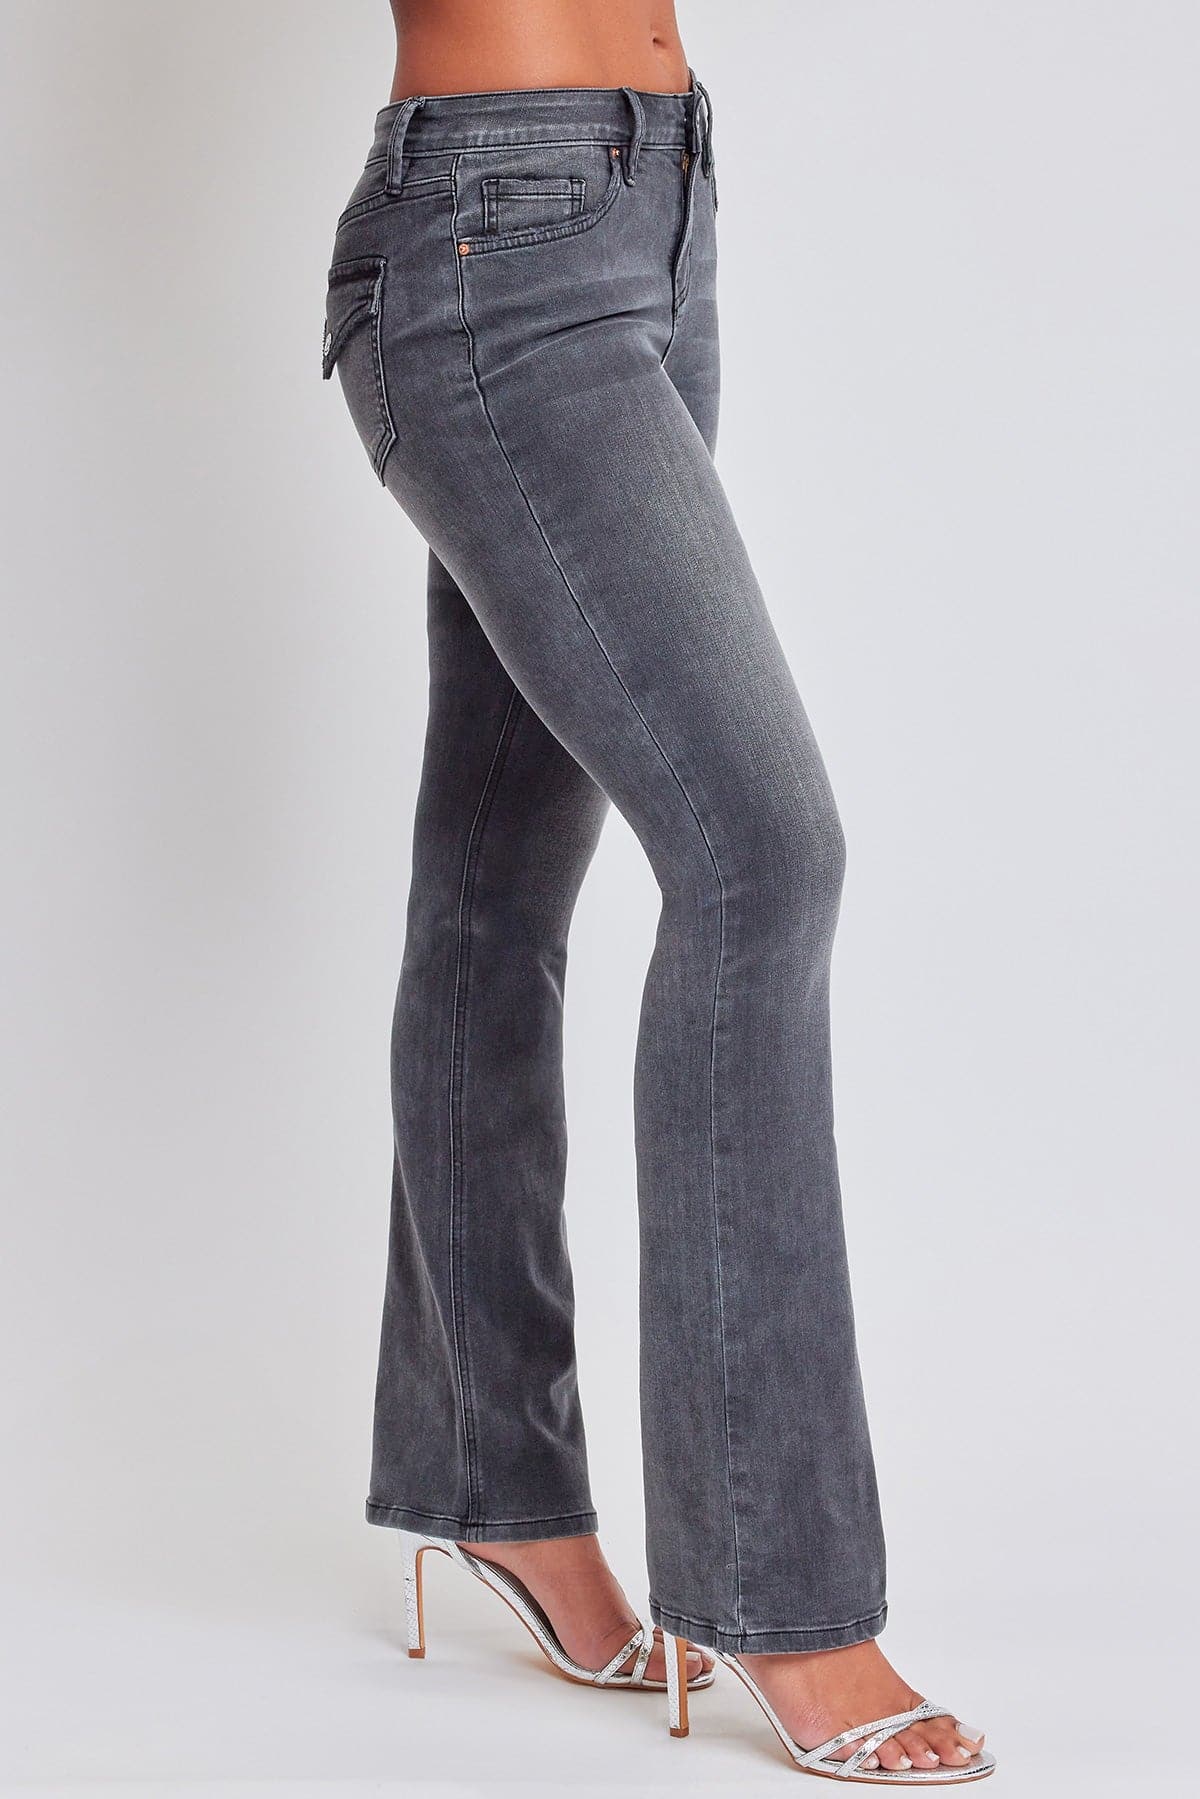 Women's Bootcut Jeans with Flap Pockets